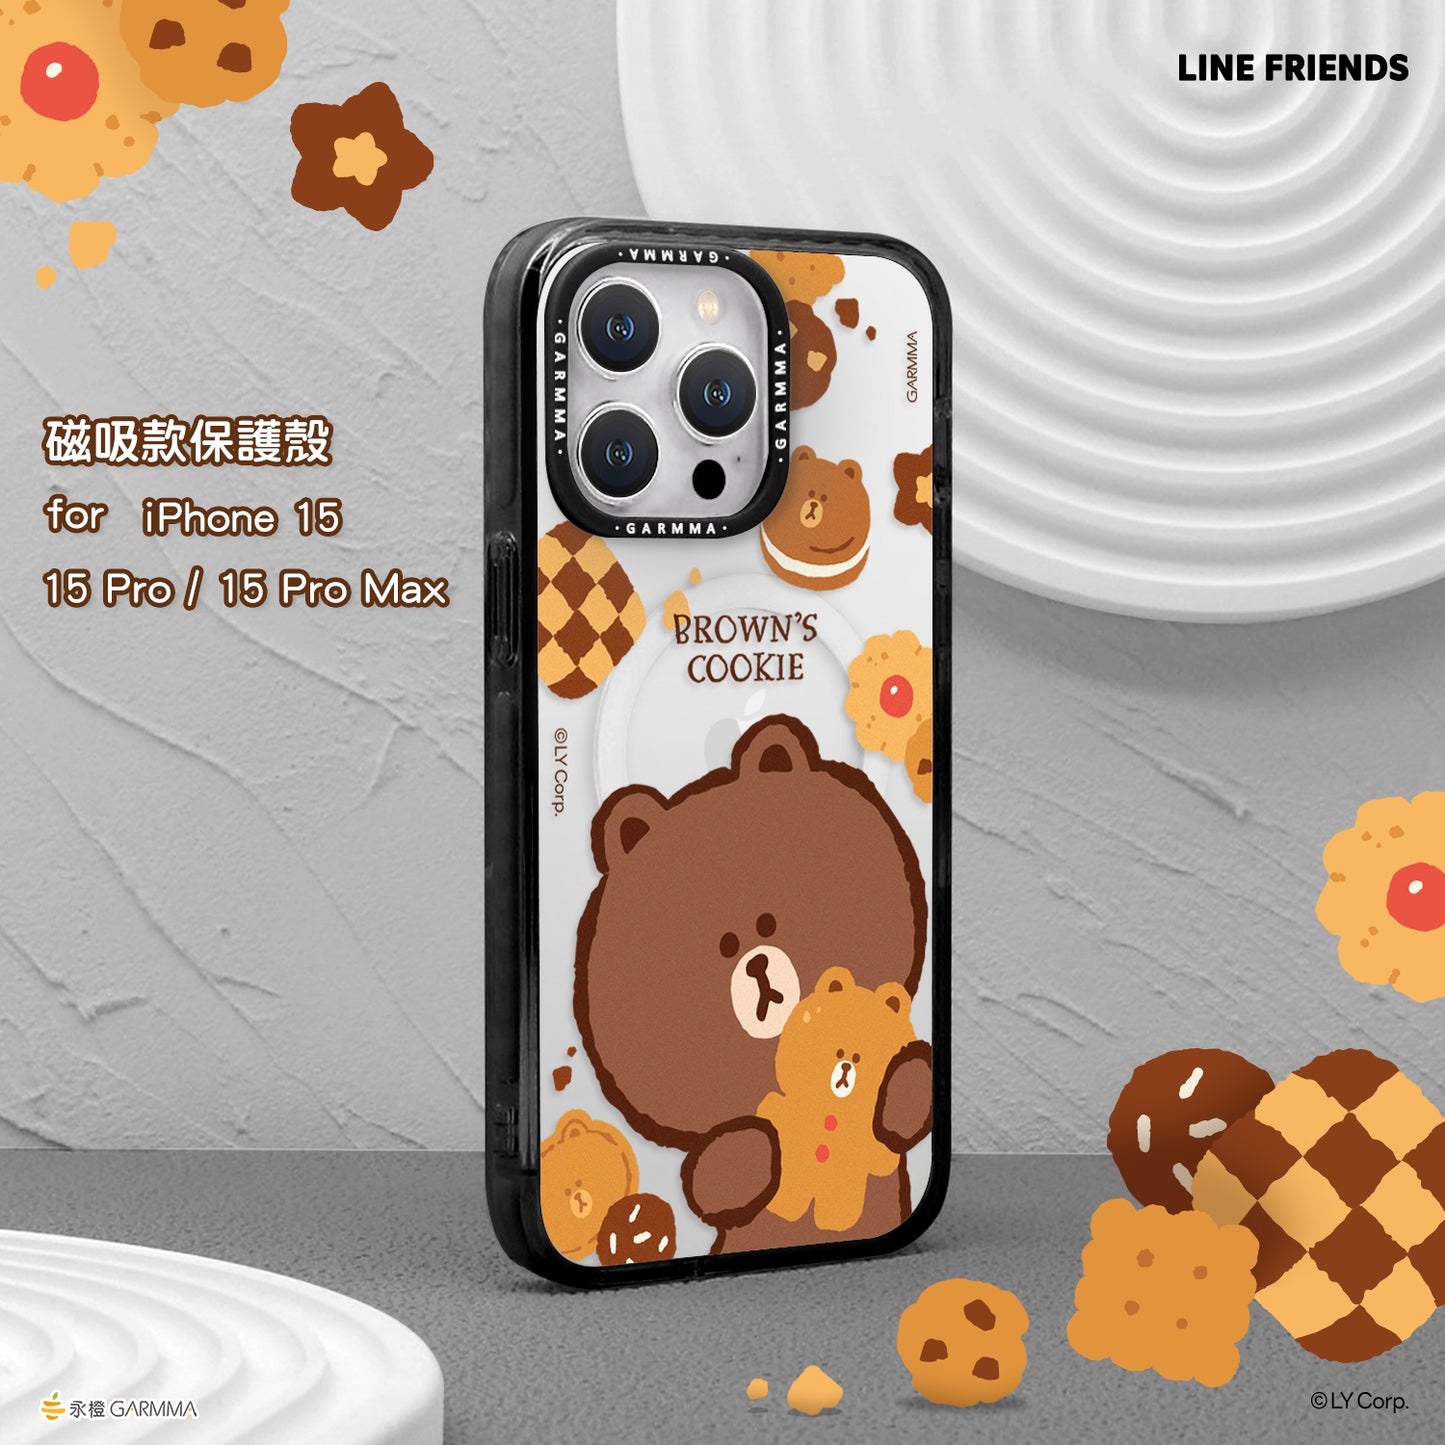 GARMMA Line Friends Cookies MagSafe Premium Military Grade Drop Tested Impact Case Cover